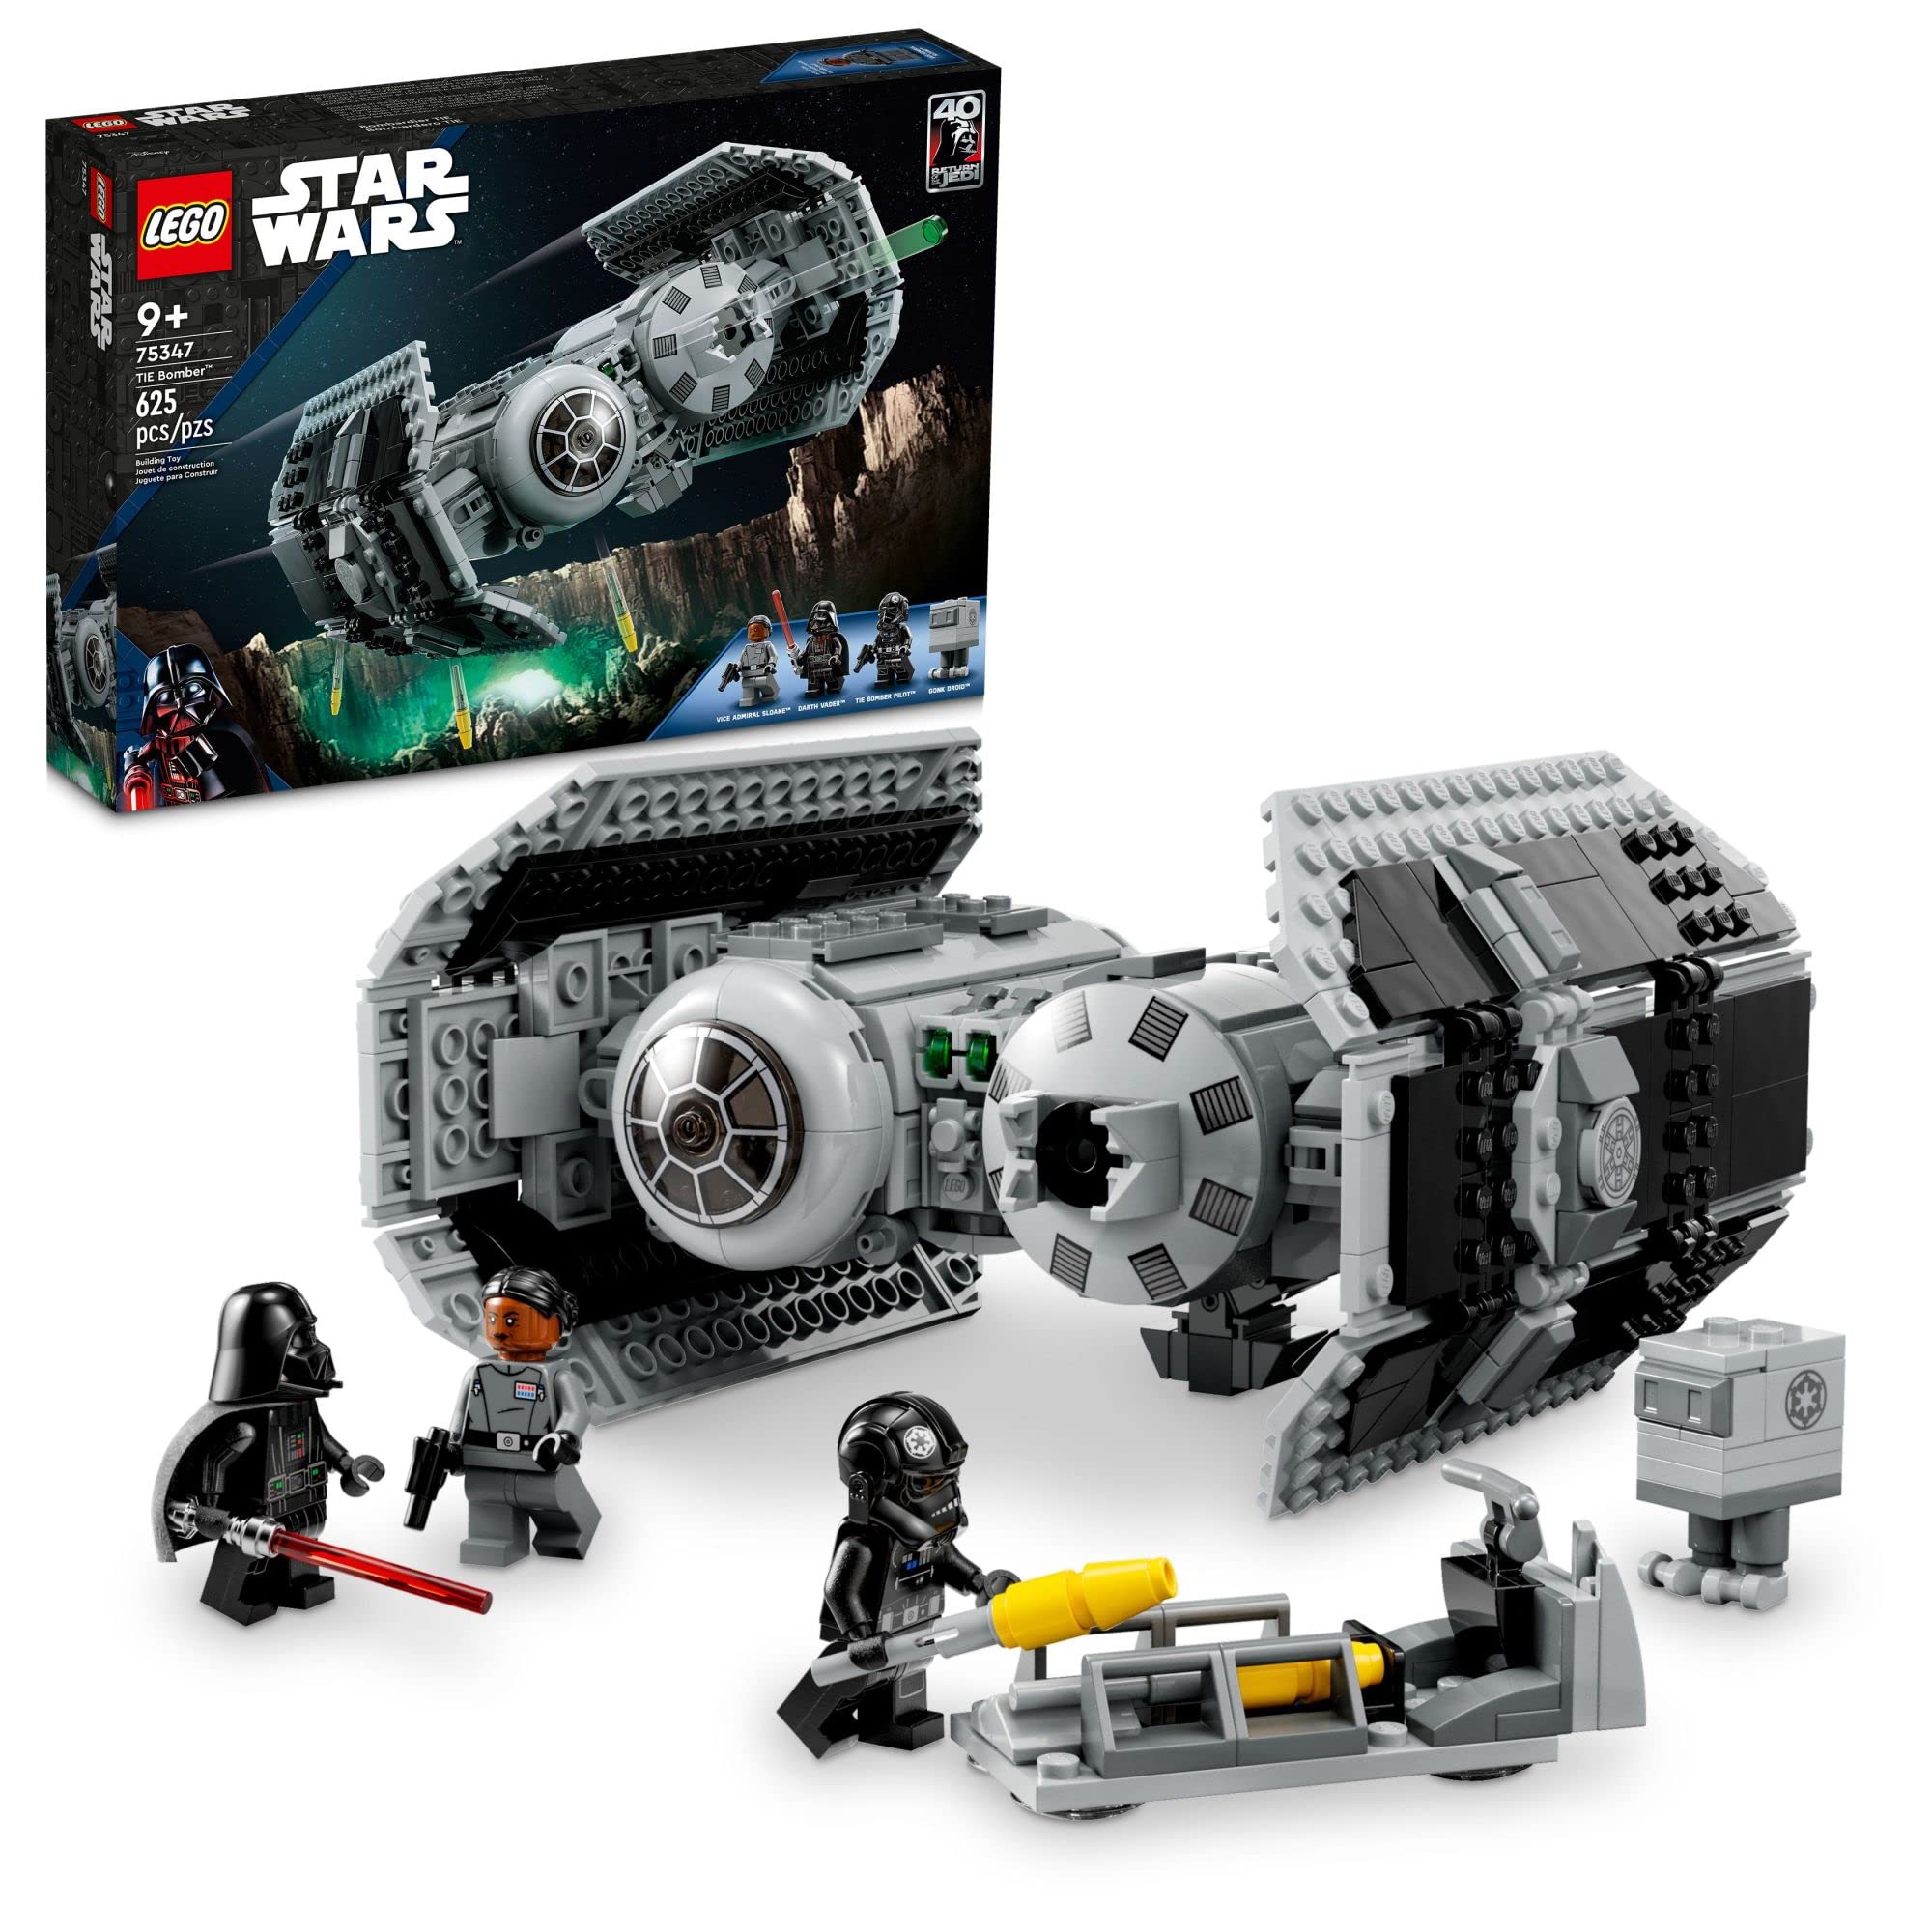 625-Piece LEGO Star Wars TIE Bomber Building Kit w/ Gonk Droid Figure & 3 Minifigures $52 + Free Shipping